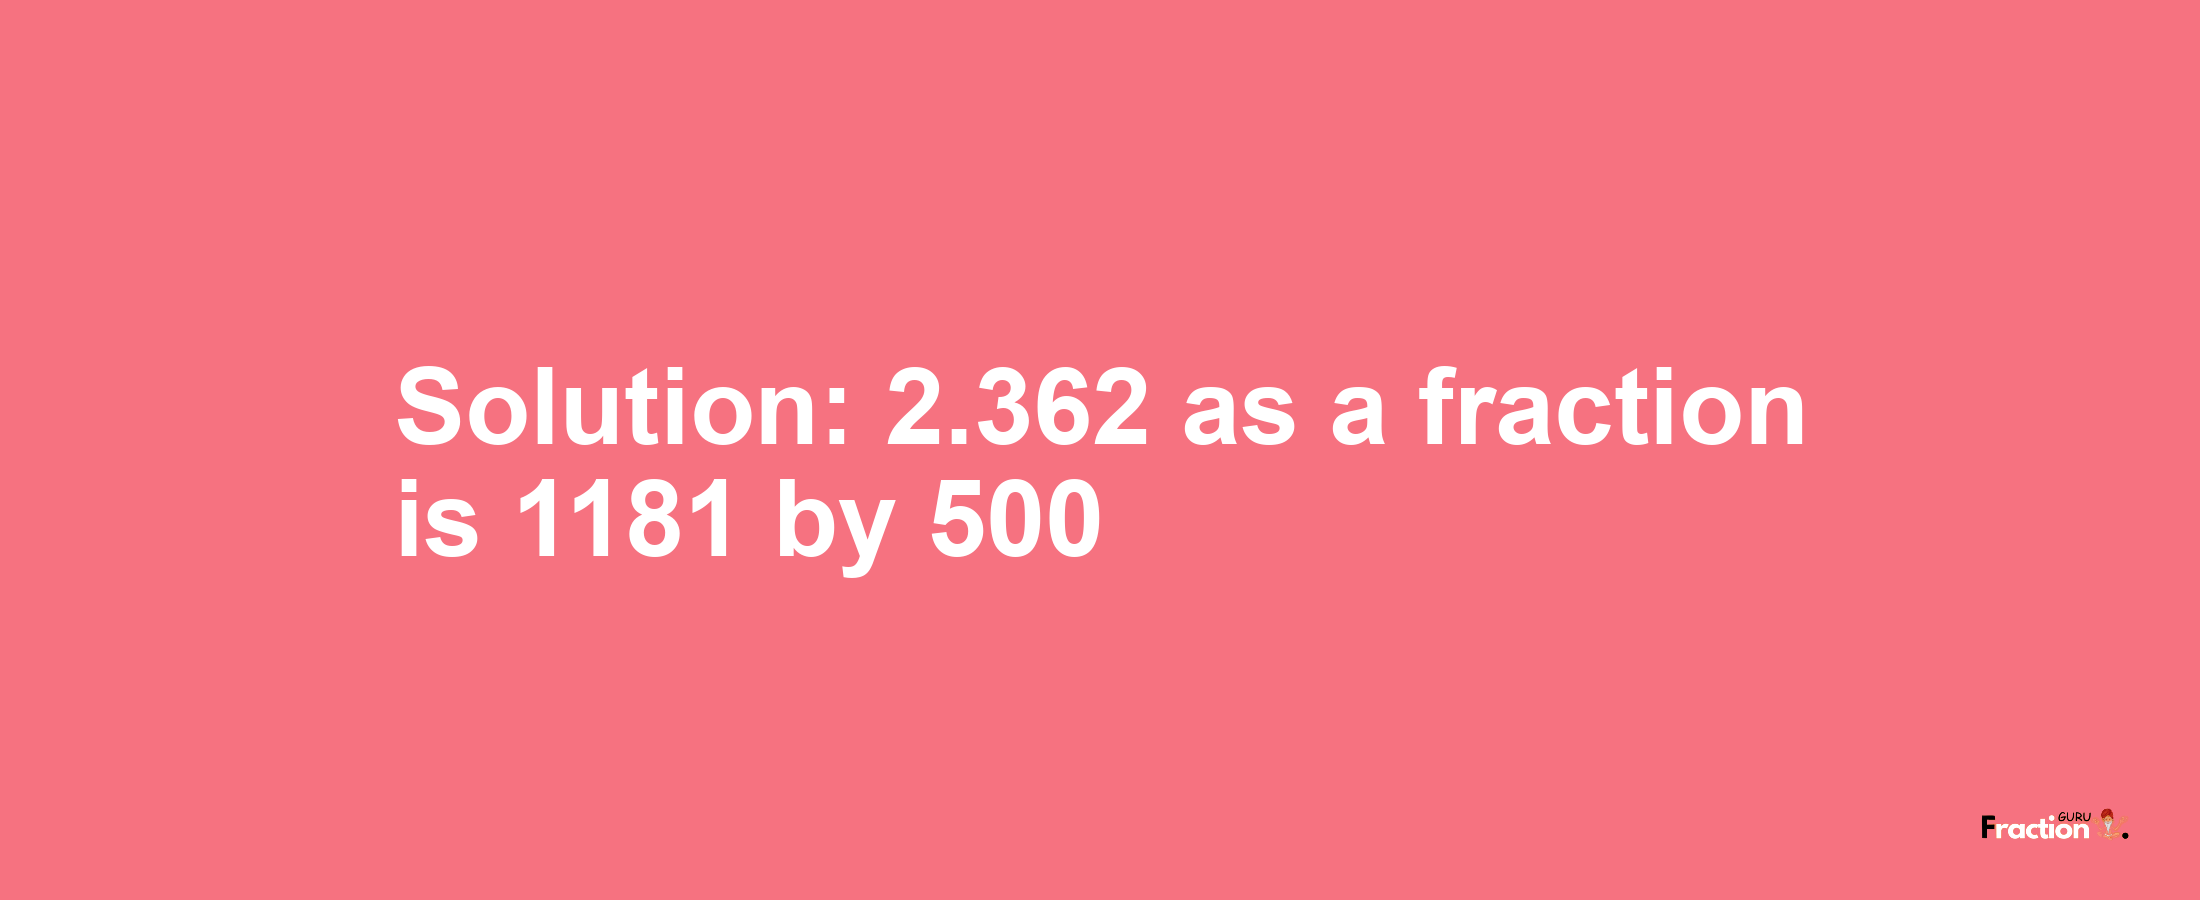 Solution:2.362 as a fraction is 1181/500